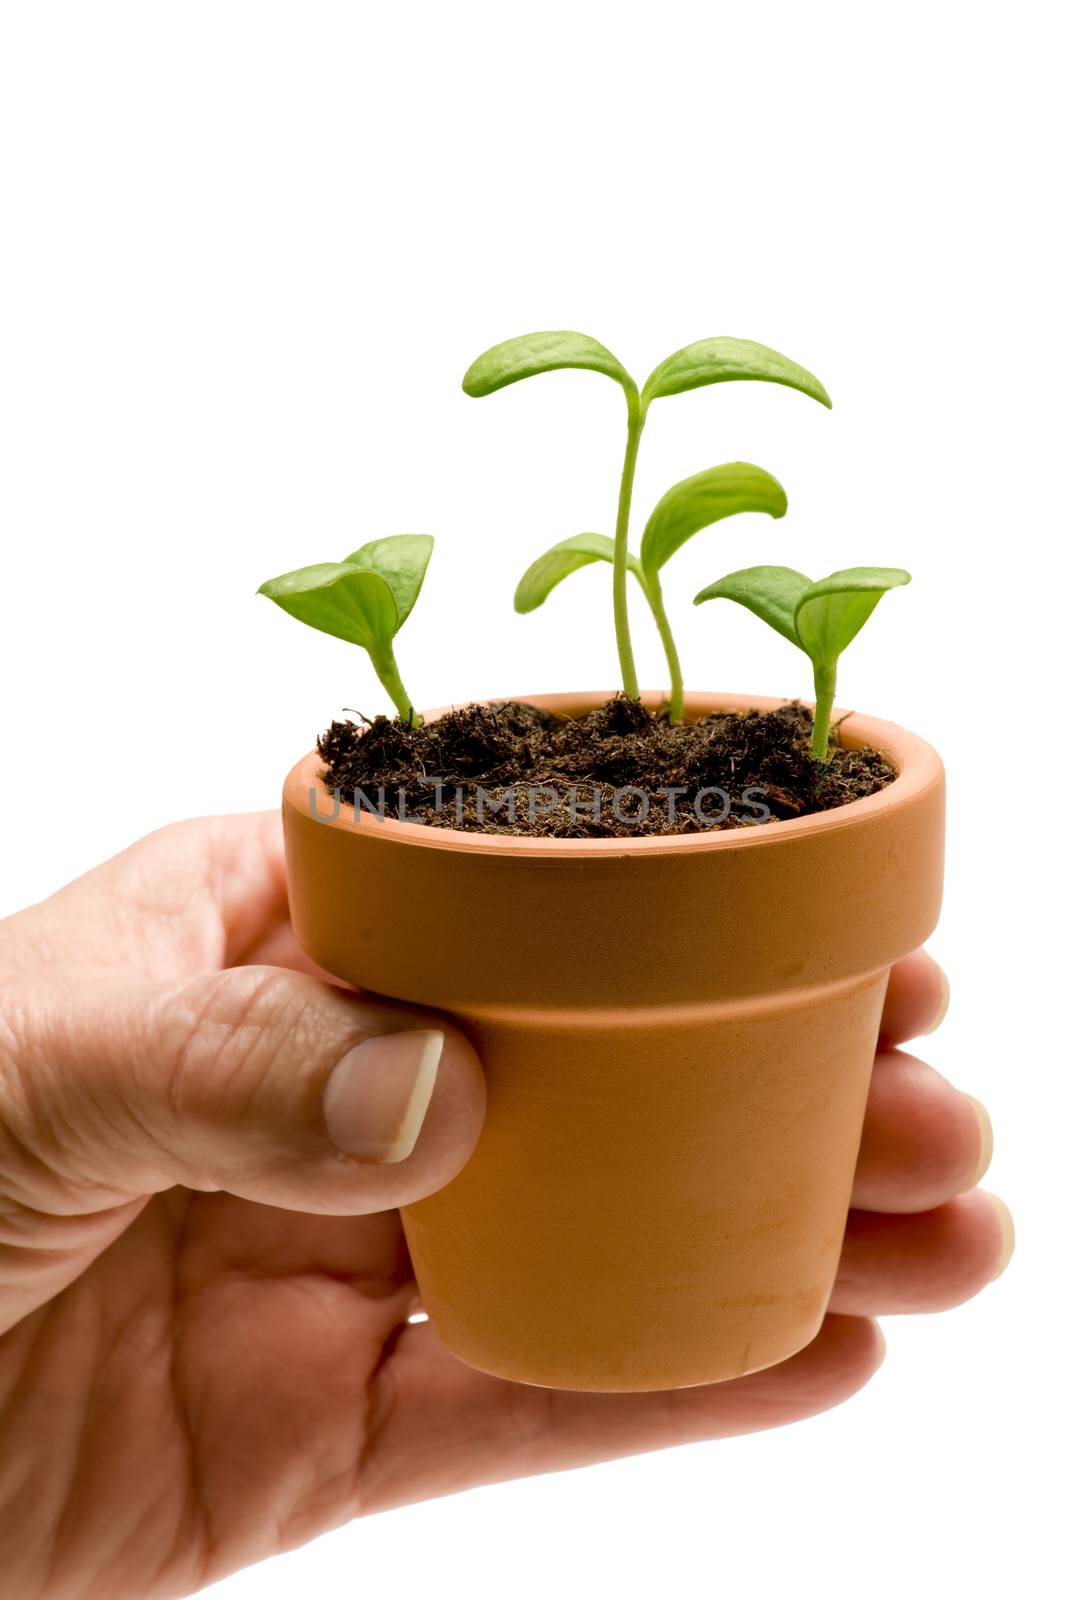 Hand Holding Small Clay Pot With Sprouts by stockbuster1